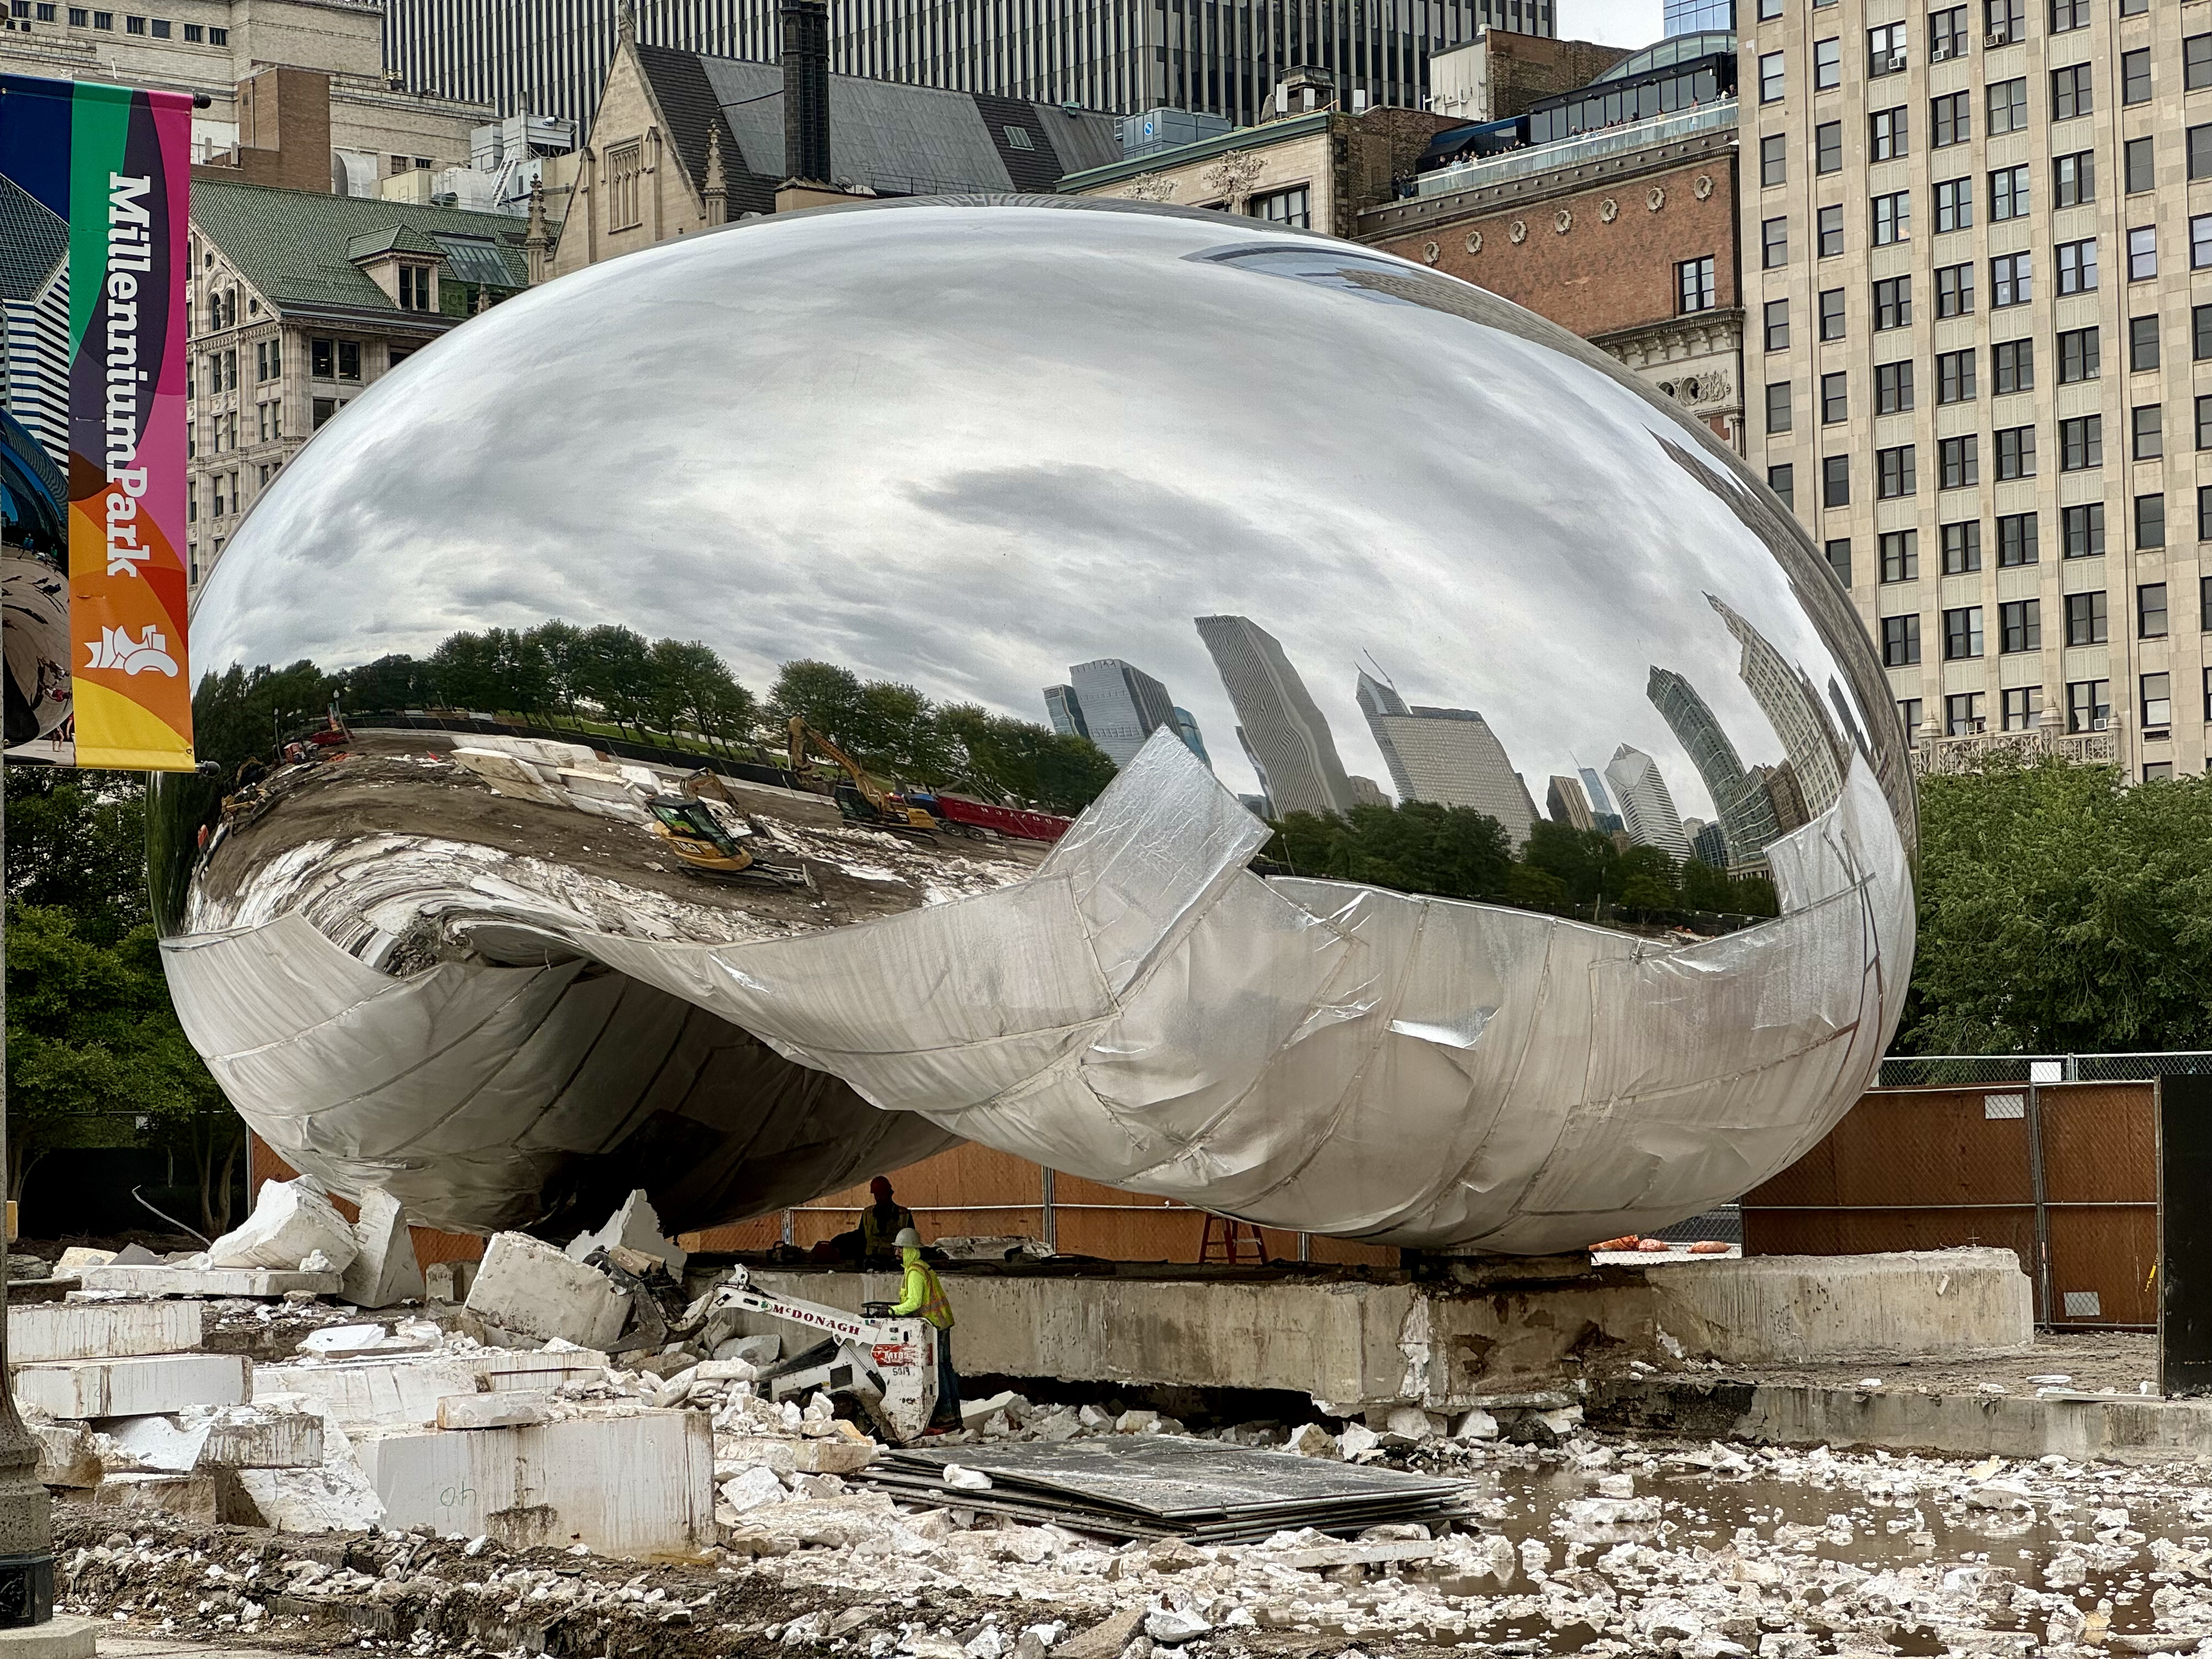 The Bean - Construction around the area